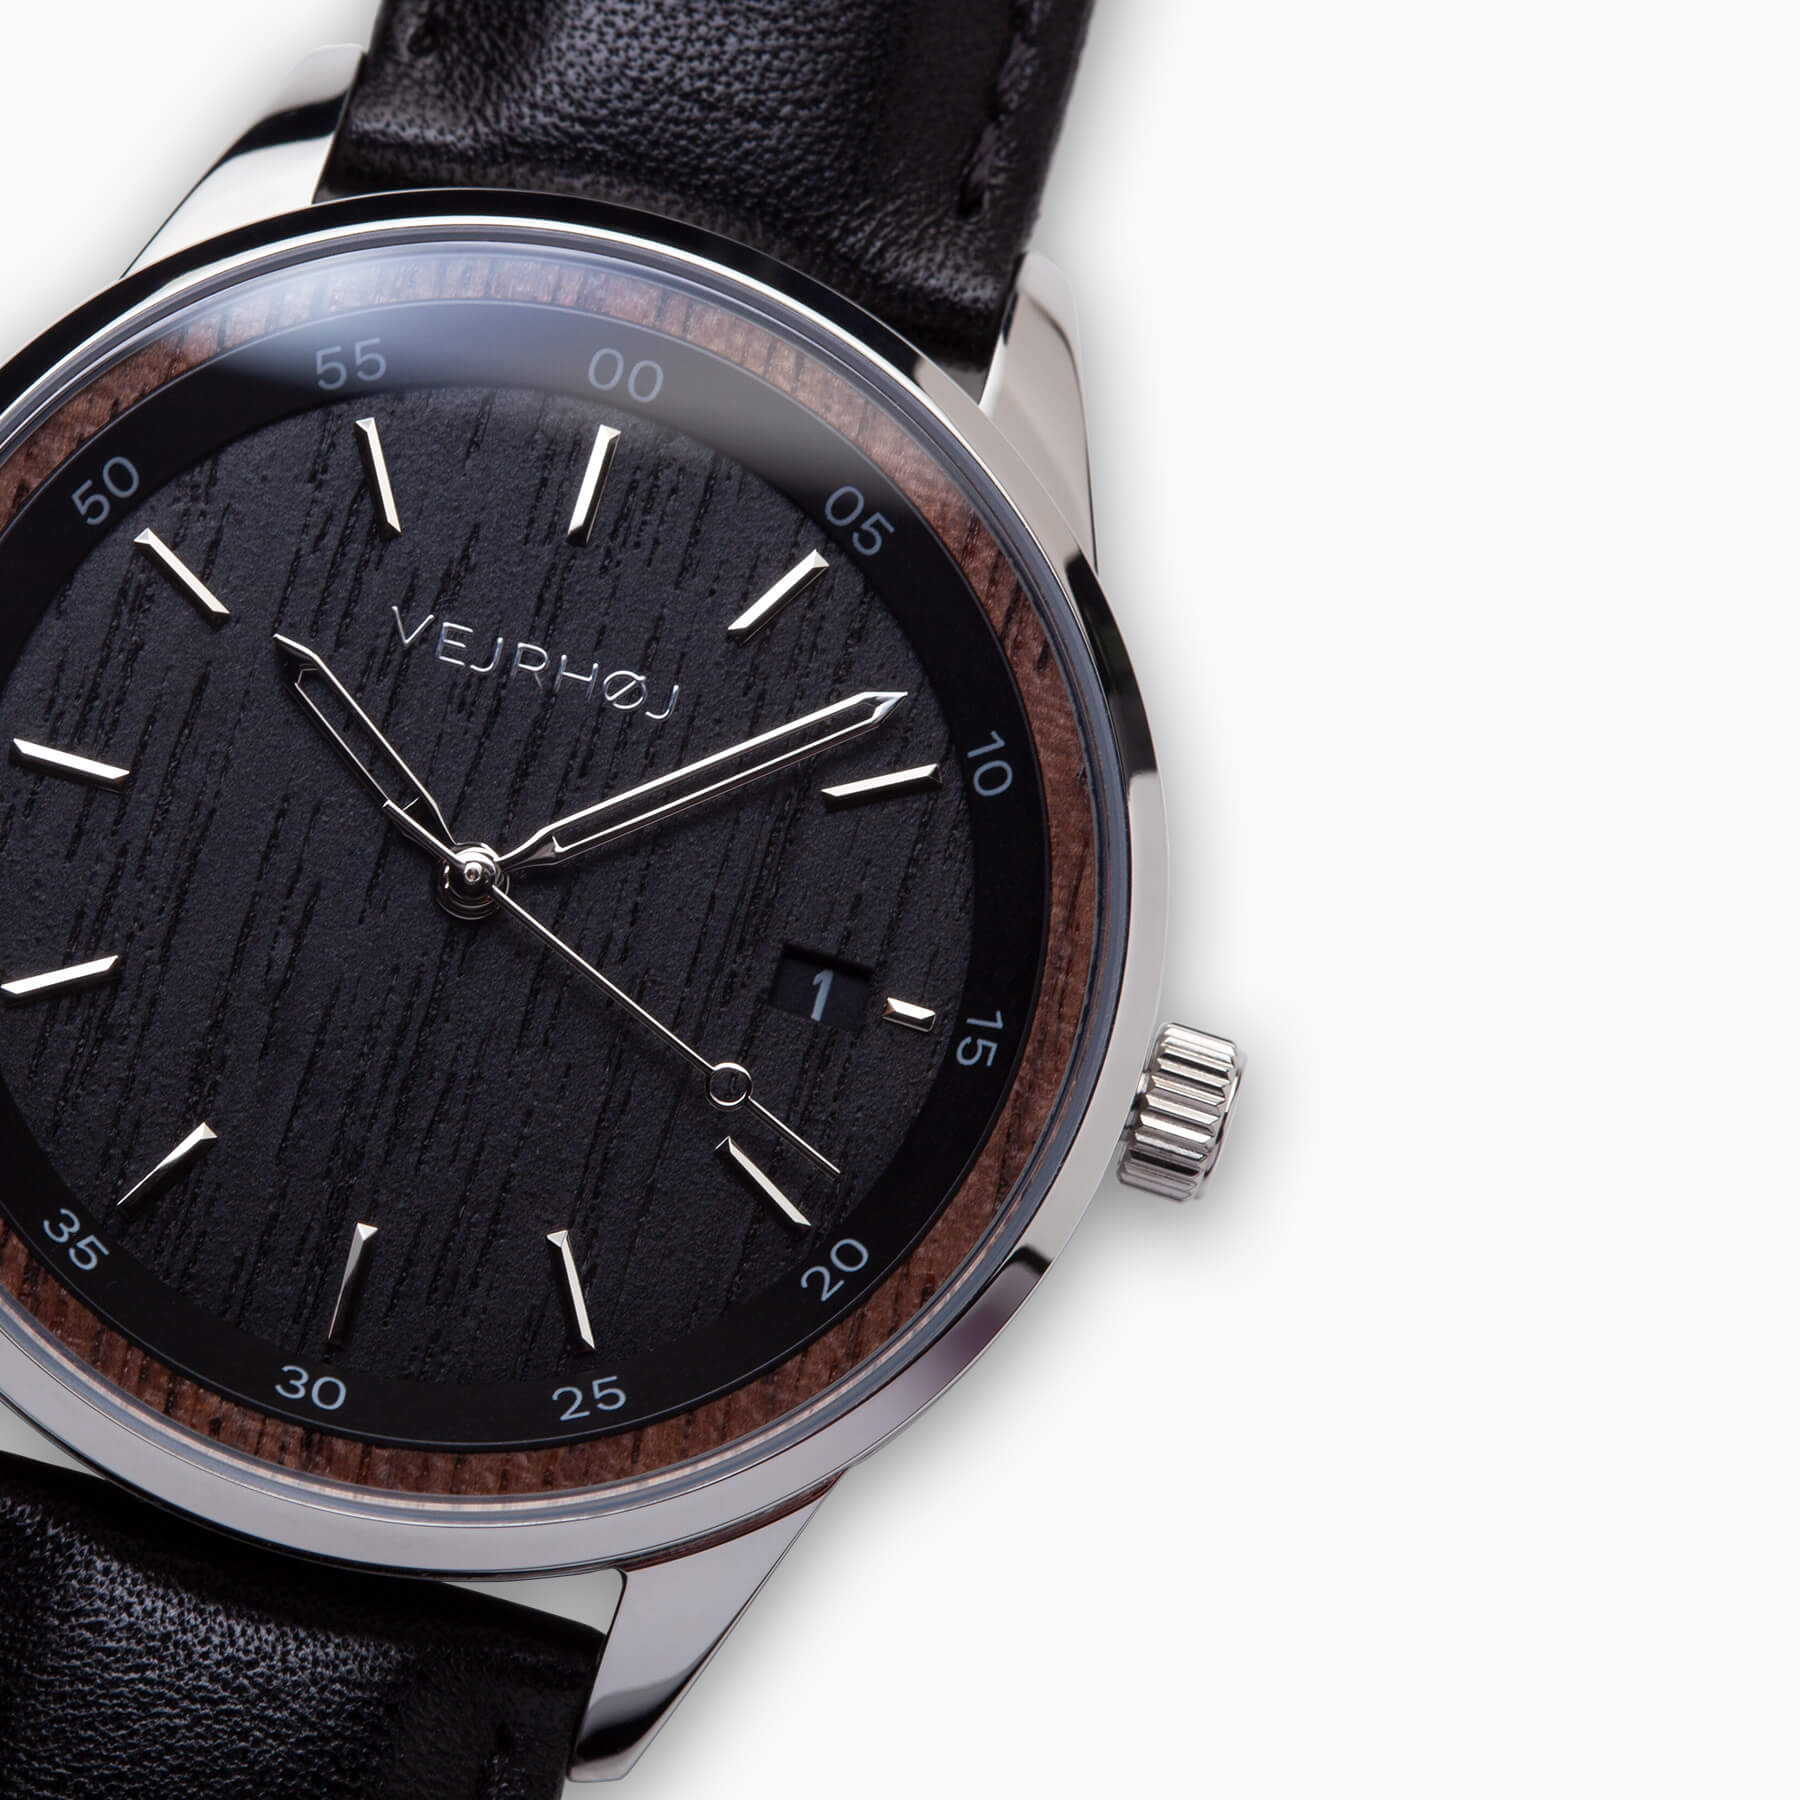 closeup of black automatic wrist watch clearly displaying the VEJRHØJ logo in silver color